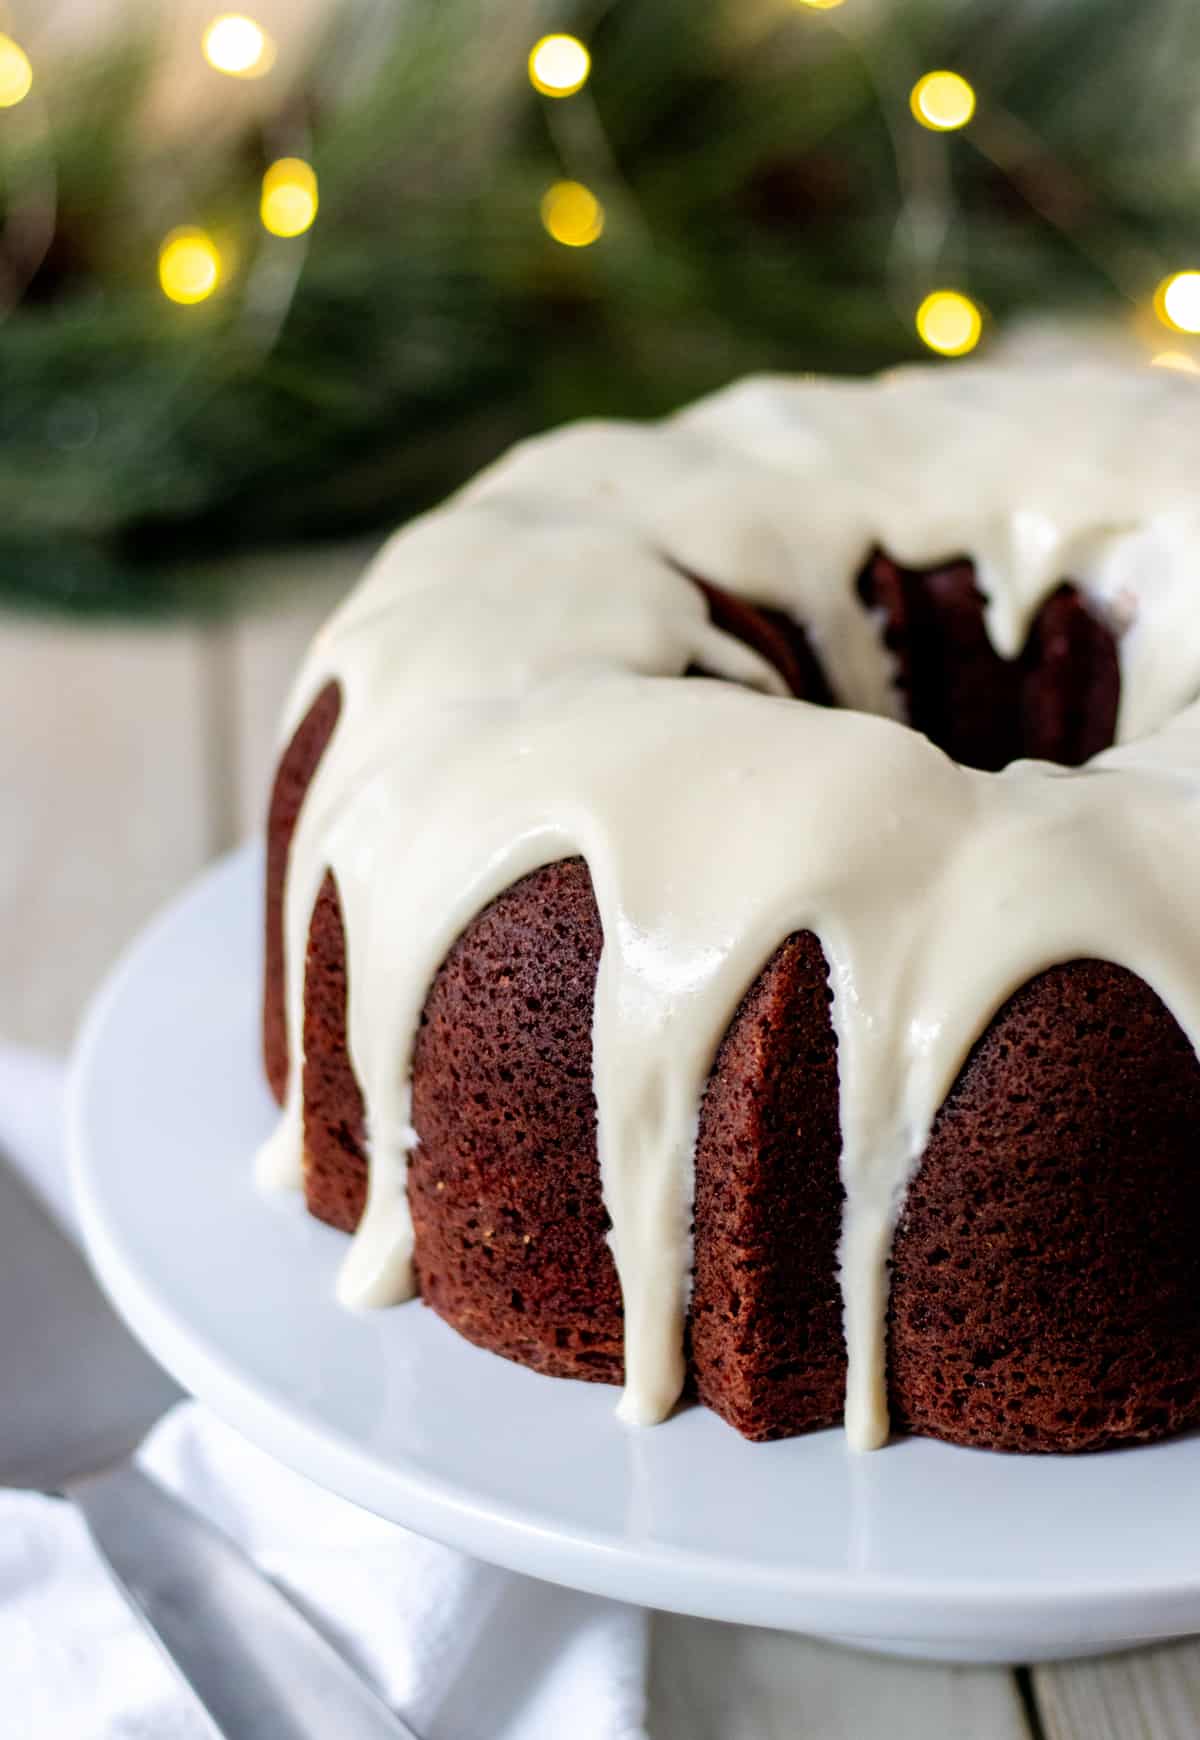 Red velvet bundt cake with cream cheese frosting on a cake plate.